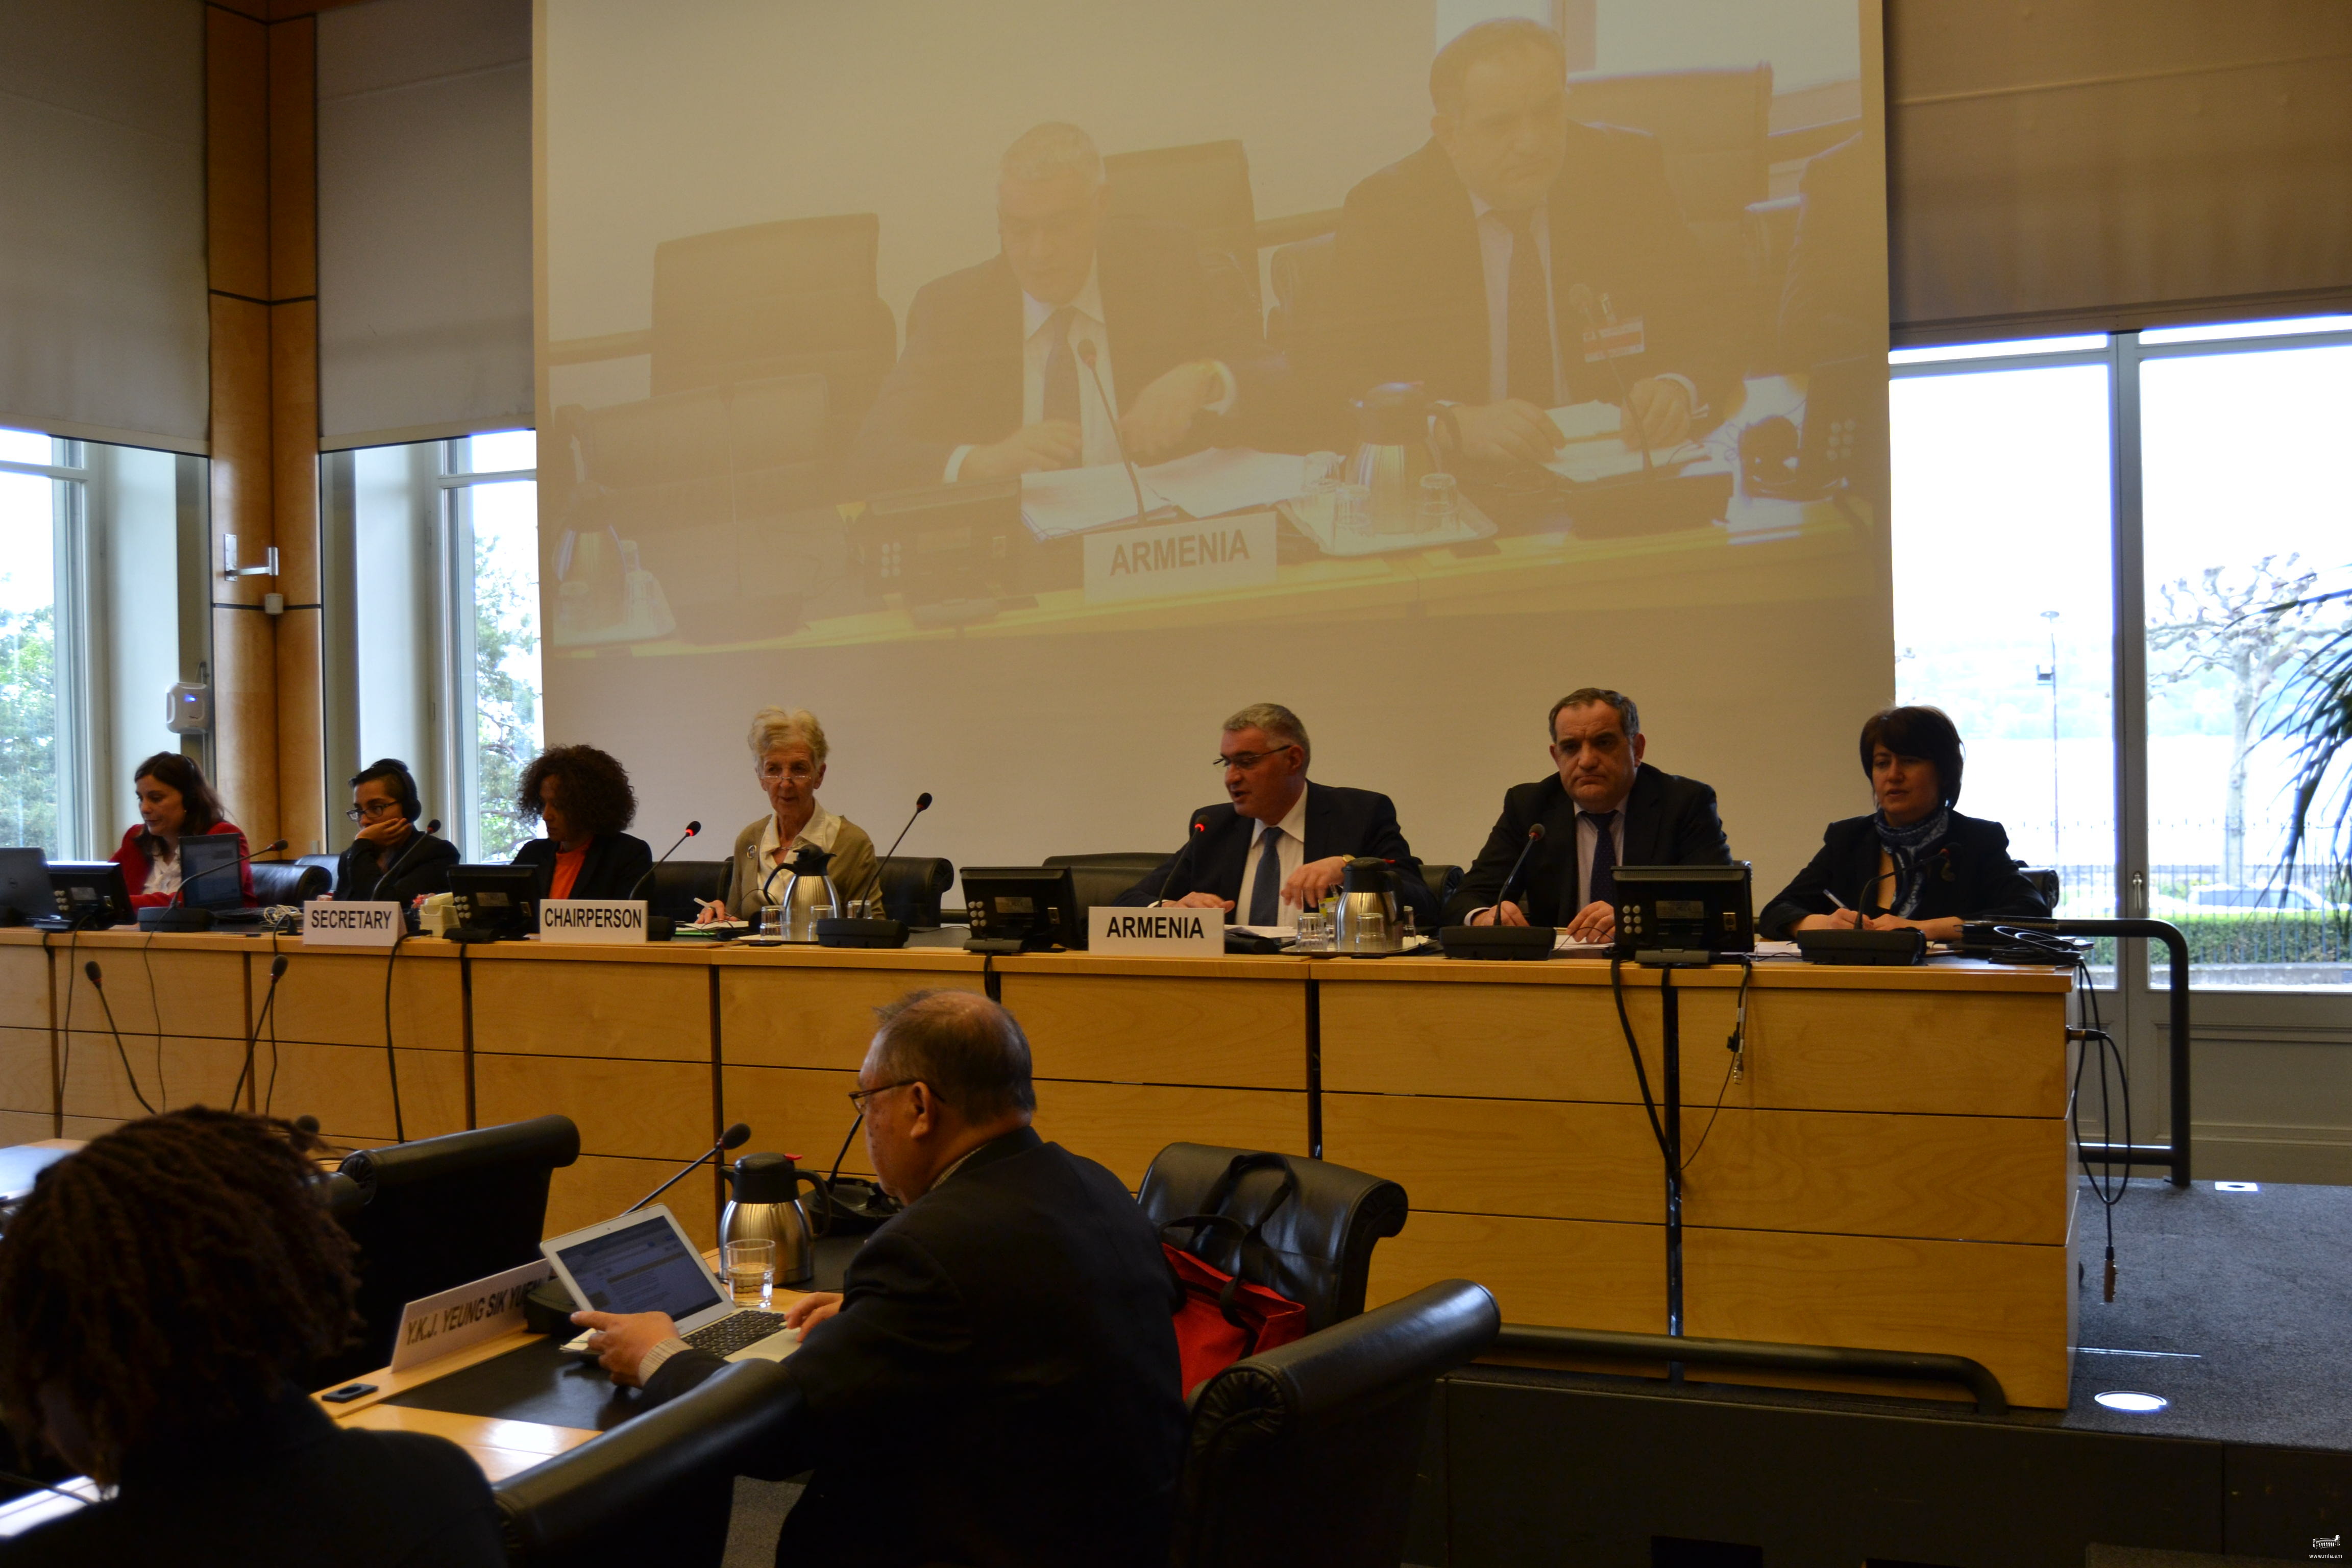 The report of the Republic of Armenia was presented in Geneva to the Committee on Elimination of Racial Discrimination